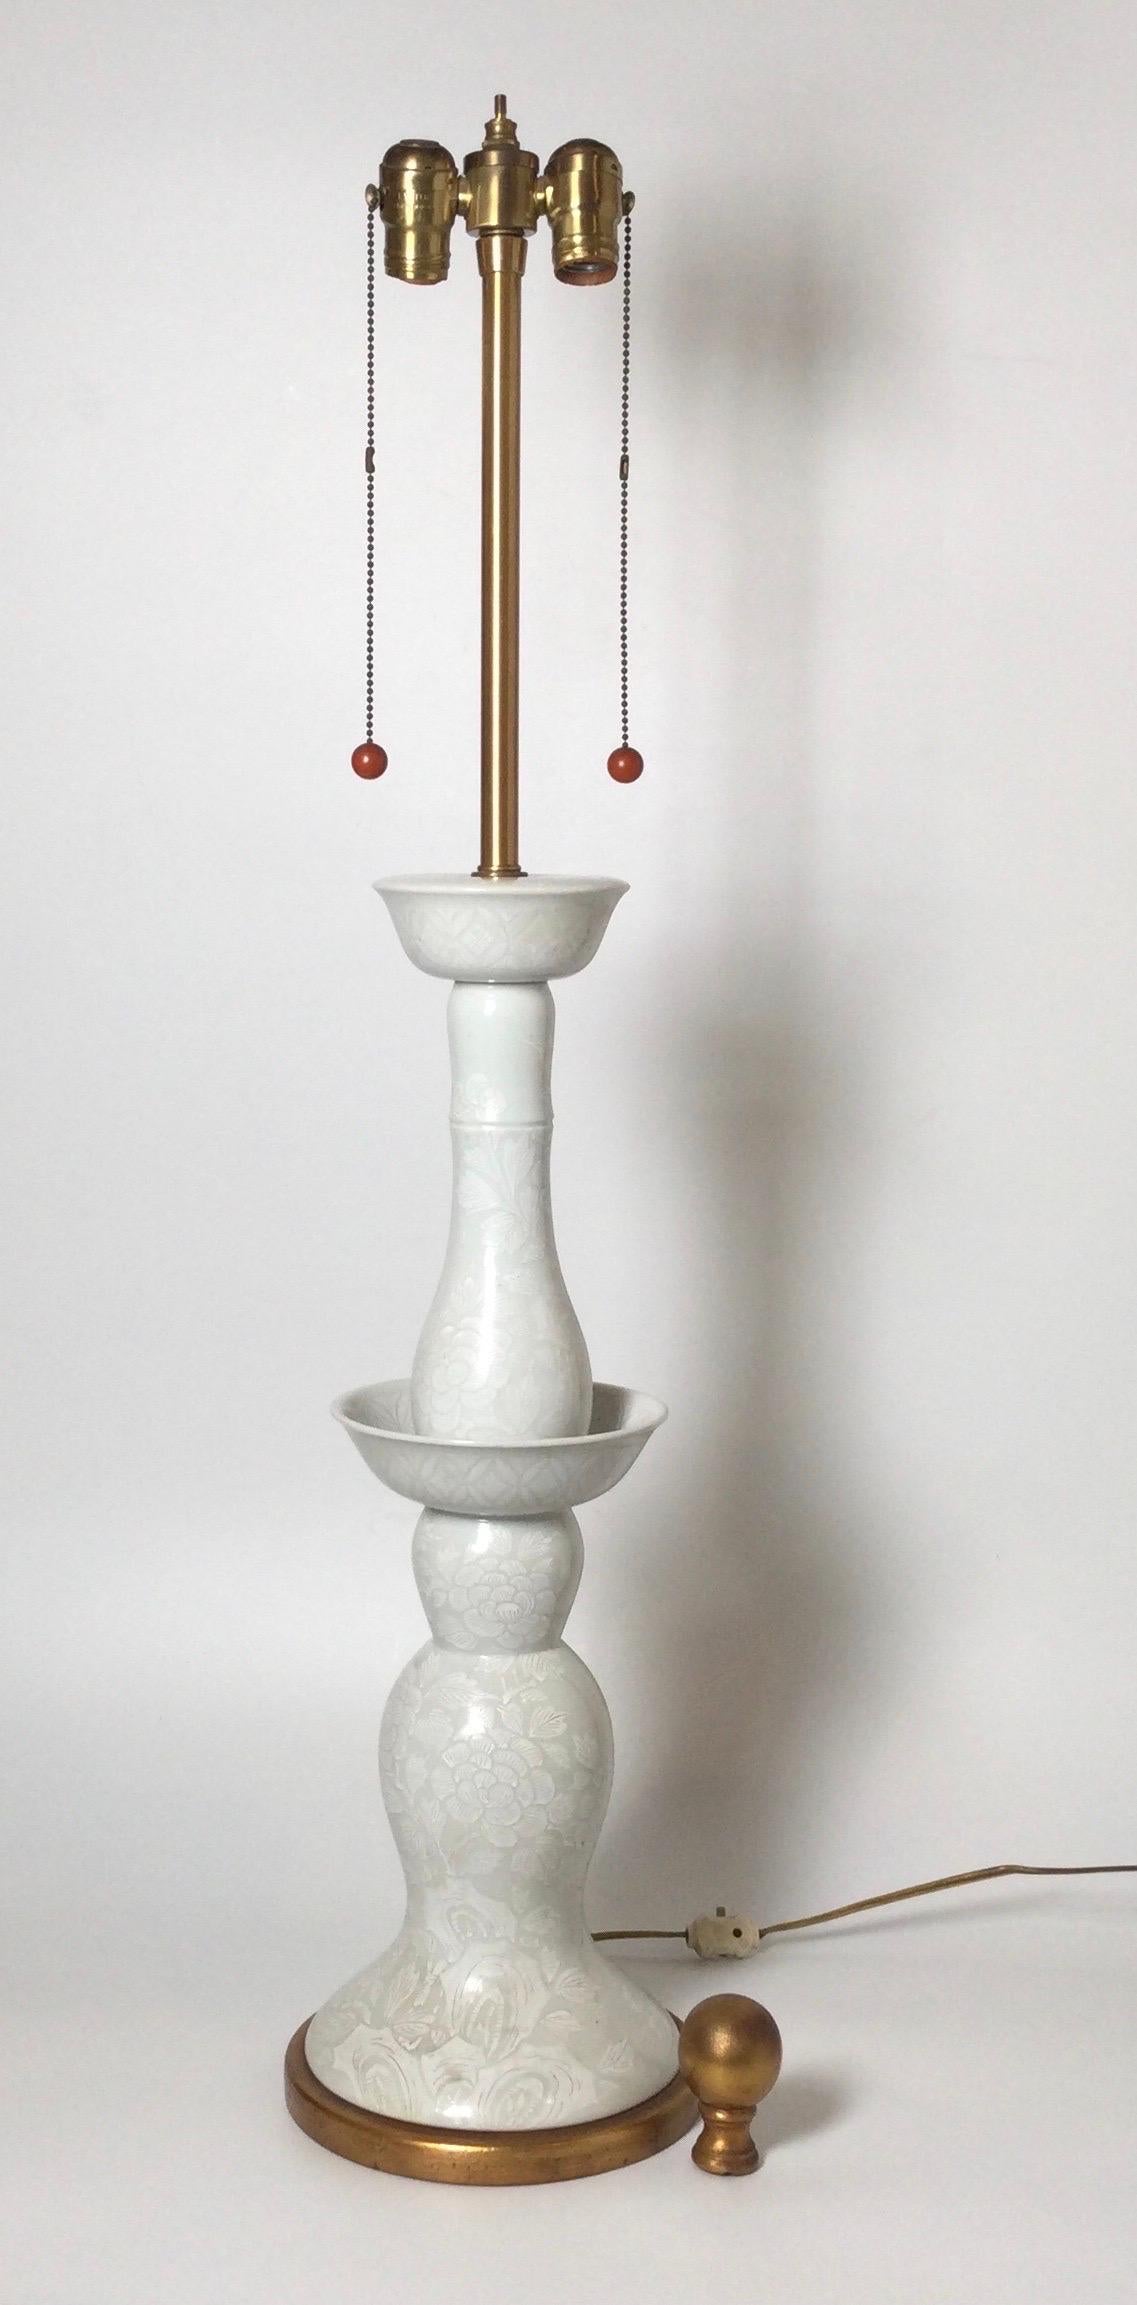 A chic pair of Hollywood regency tall porcelain lamps. The gloss off white porcelain with a pattern on pattern finish in excellent condition. The lamps with sockets for two bulbs. The shades are for photographic purposes only and not included.